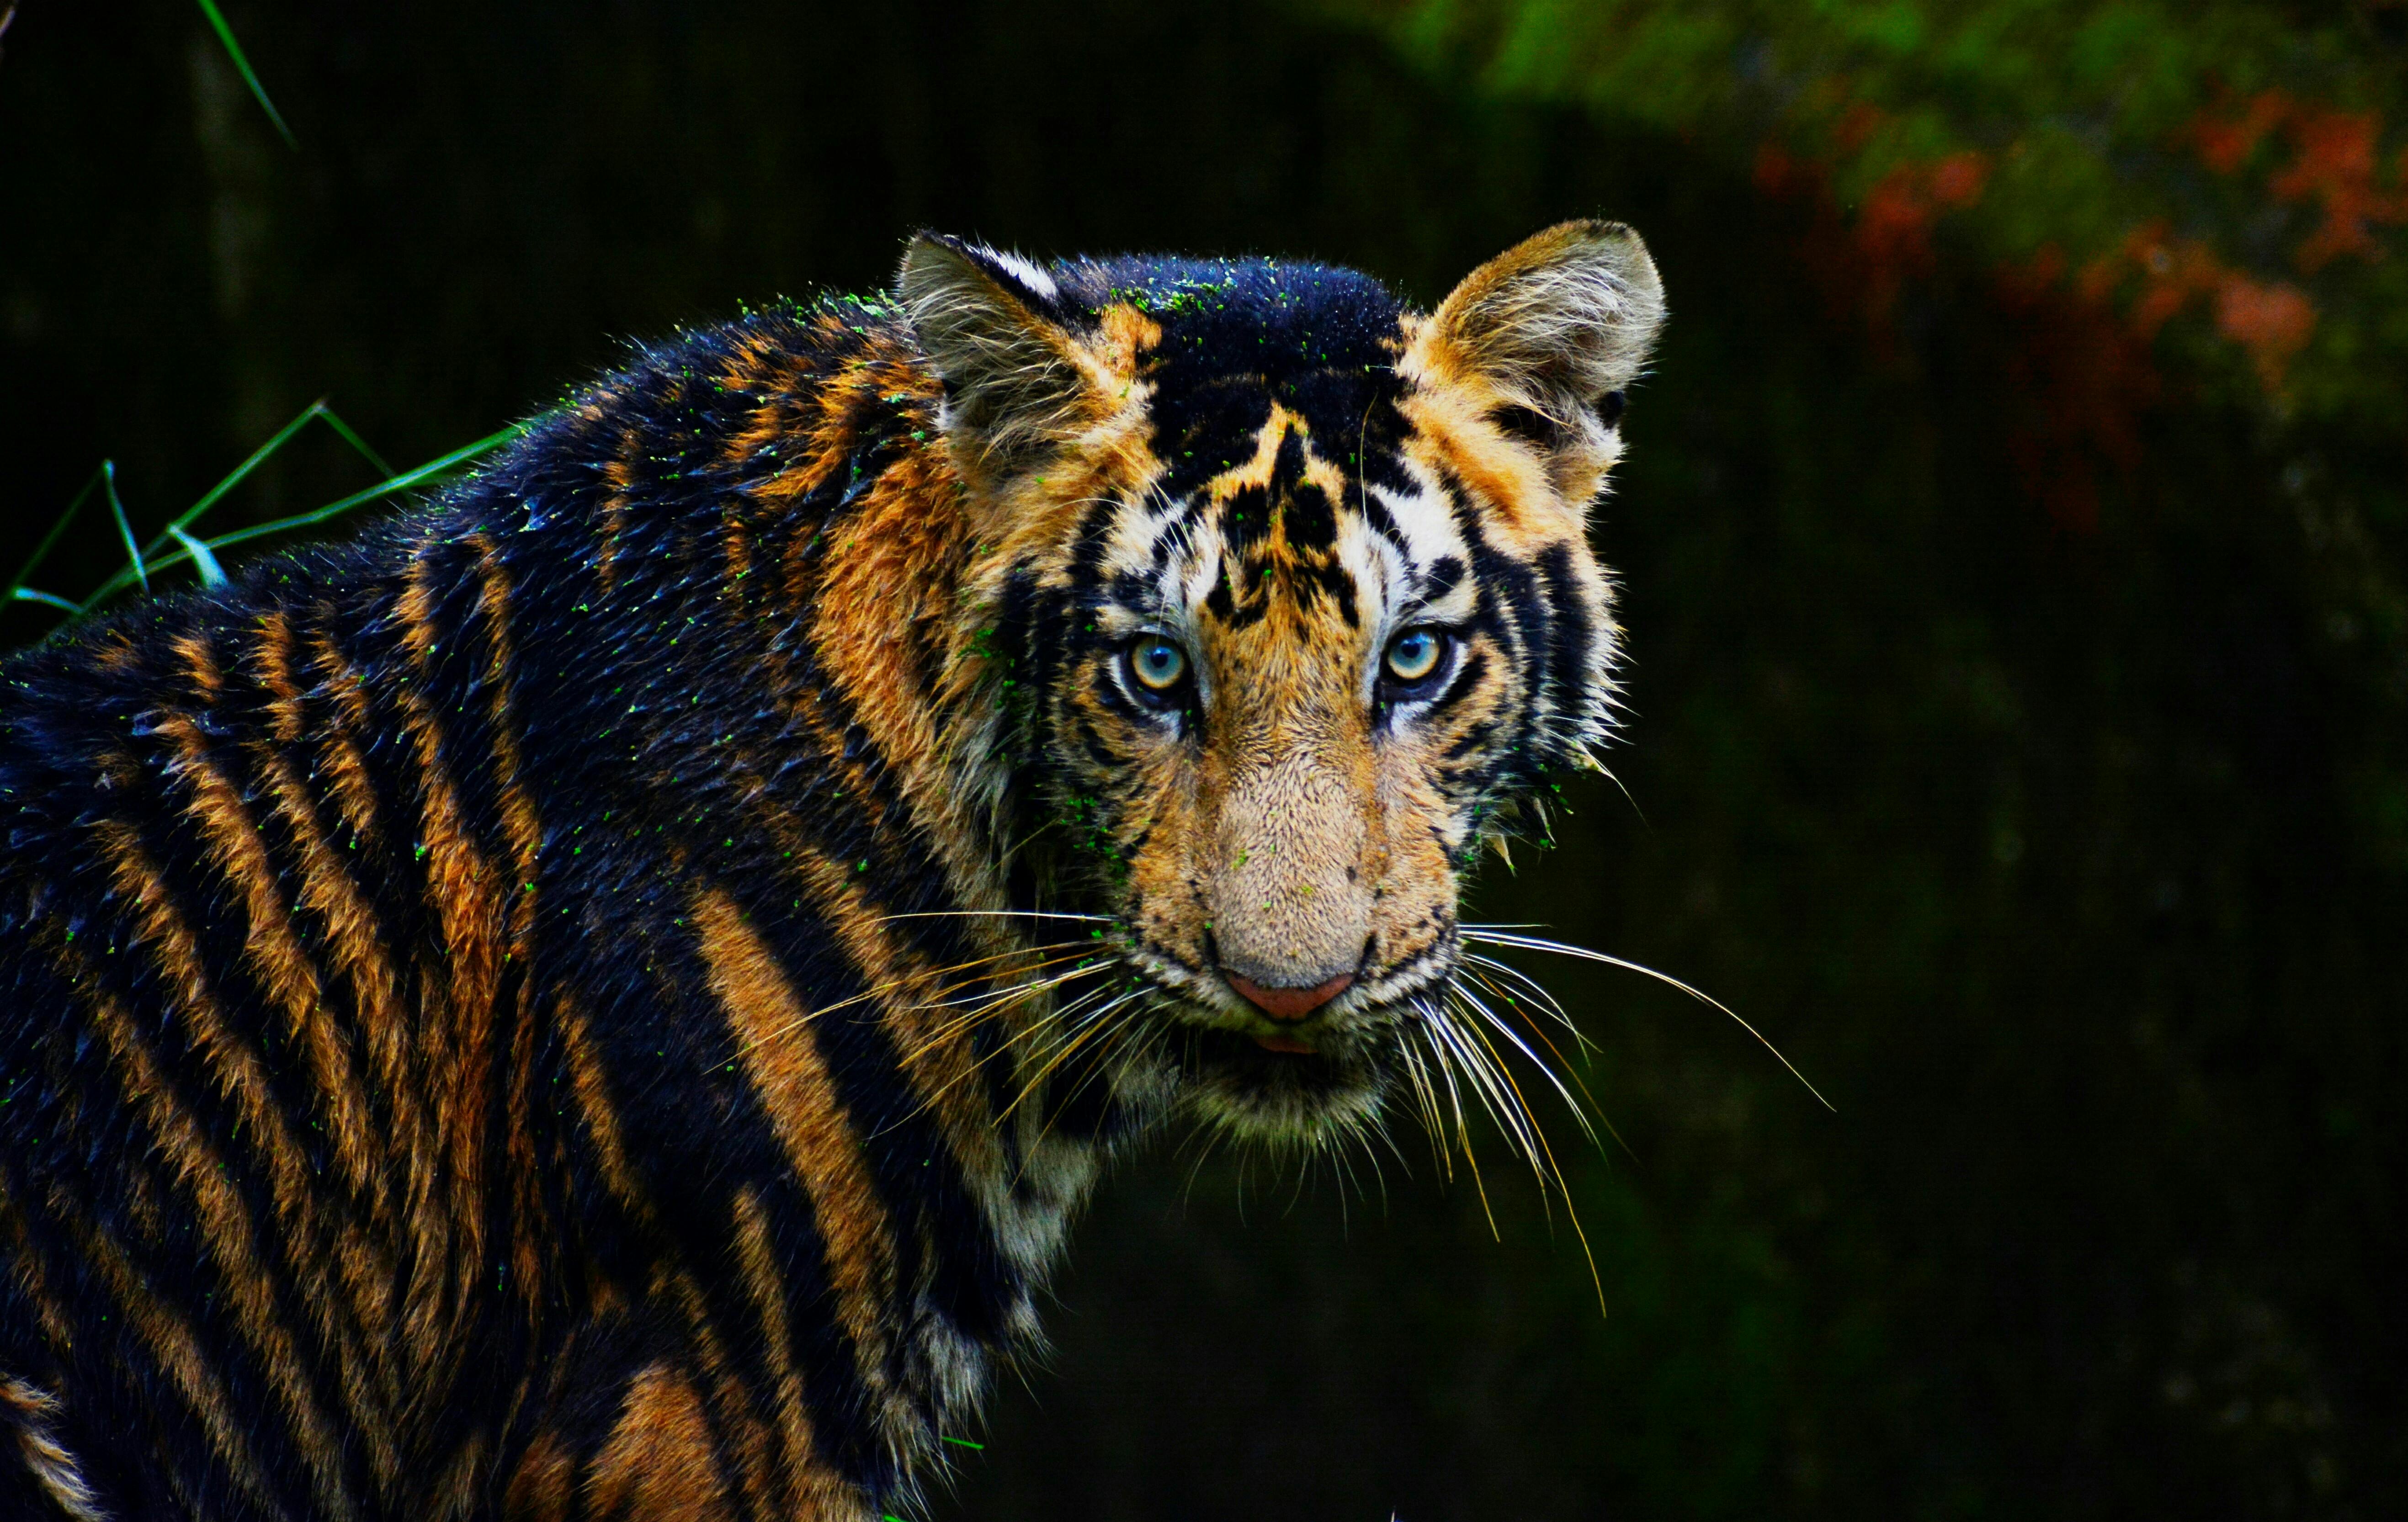 500+ Best Tiger Images · 100% Free Download · Pexels Stock Photos